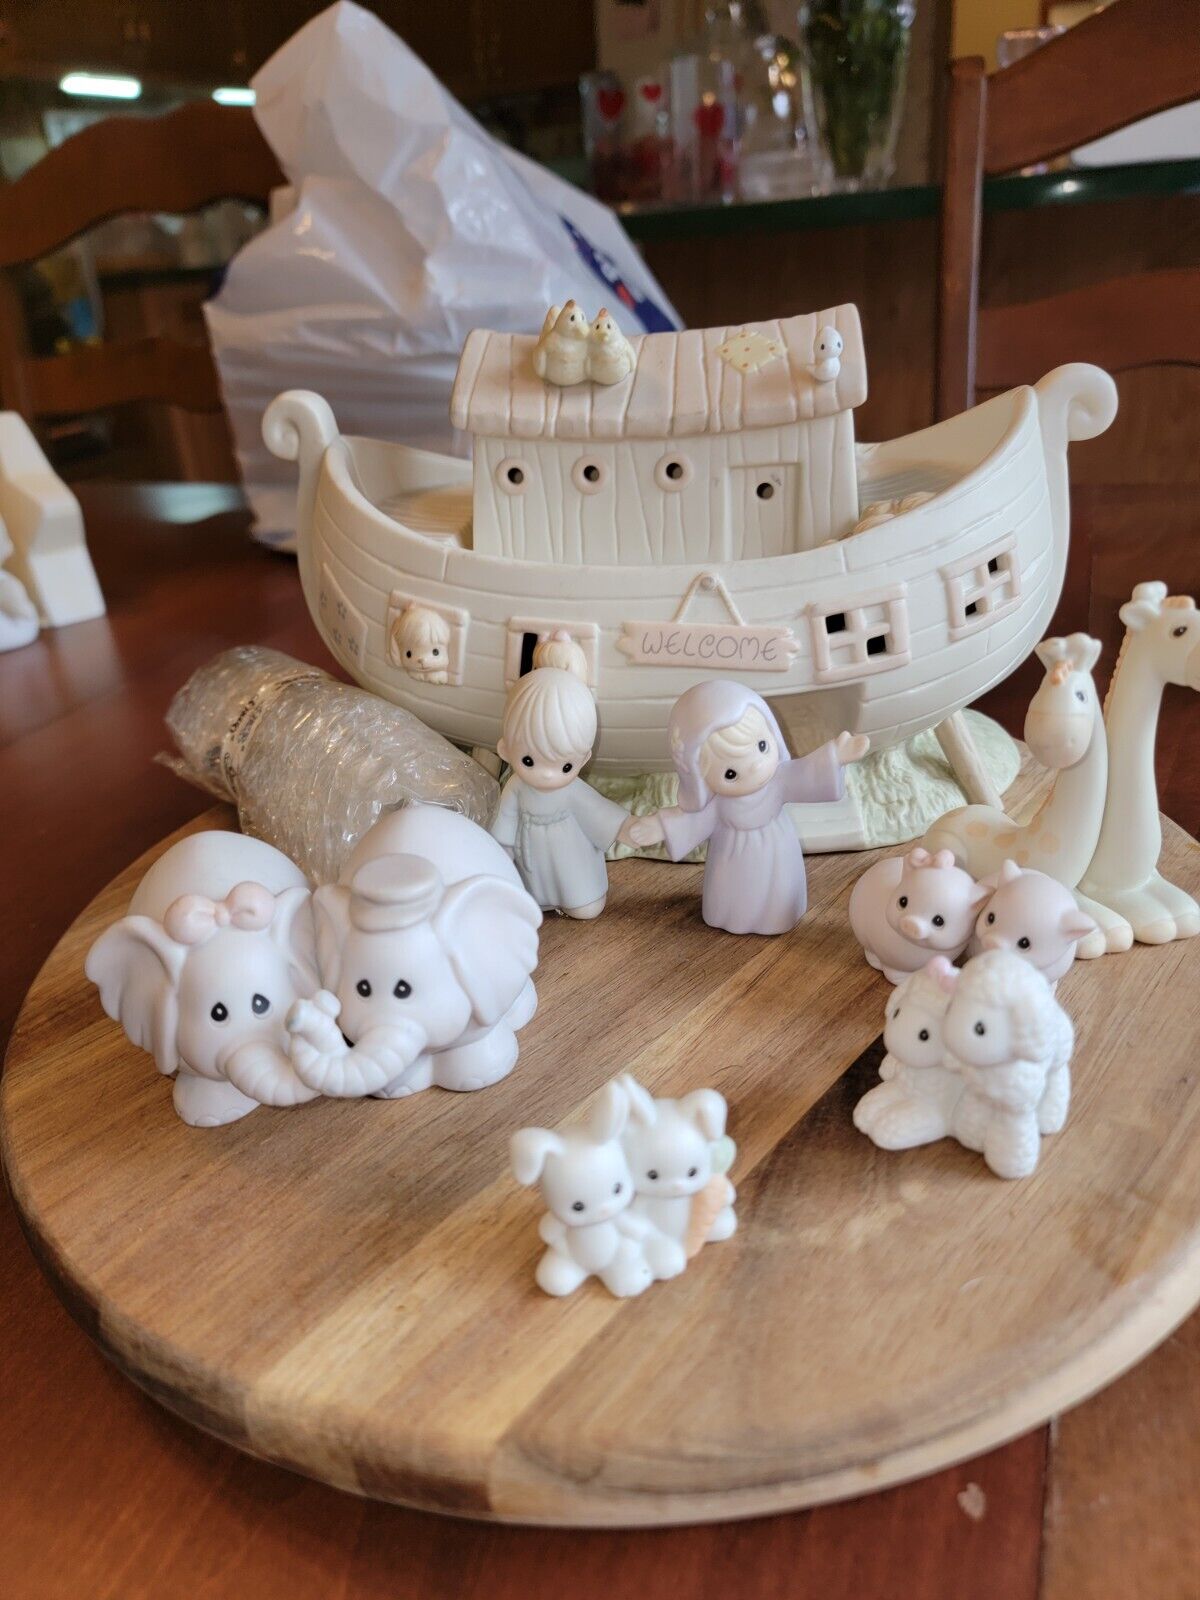 1992 Precious Moments Two By Two Noah's Ark Porcelain Figurine No Box 8 Pieces .